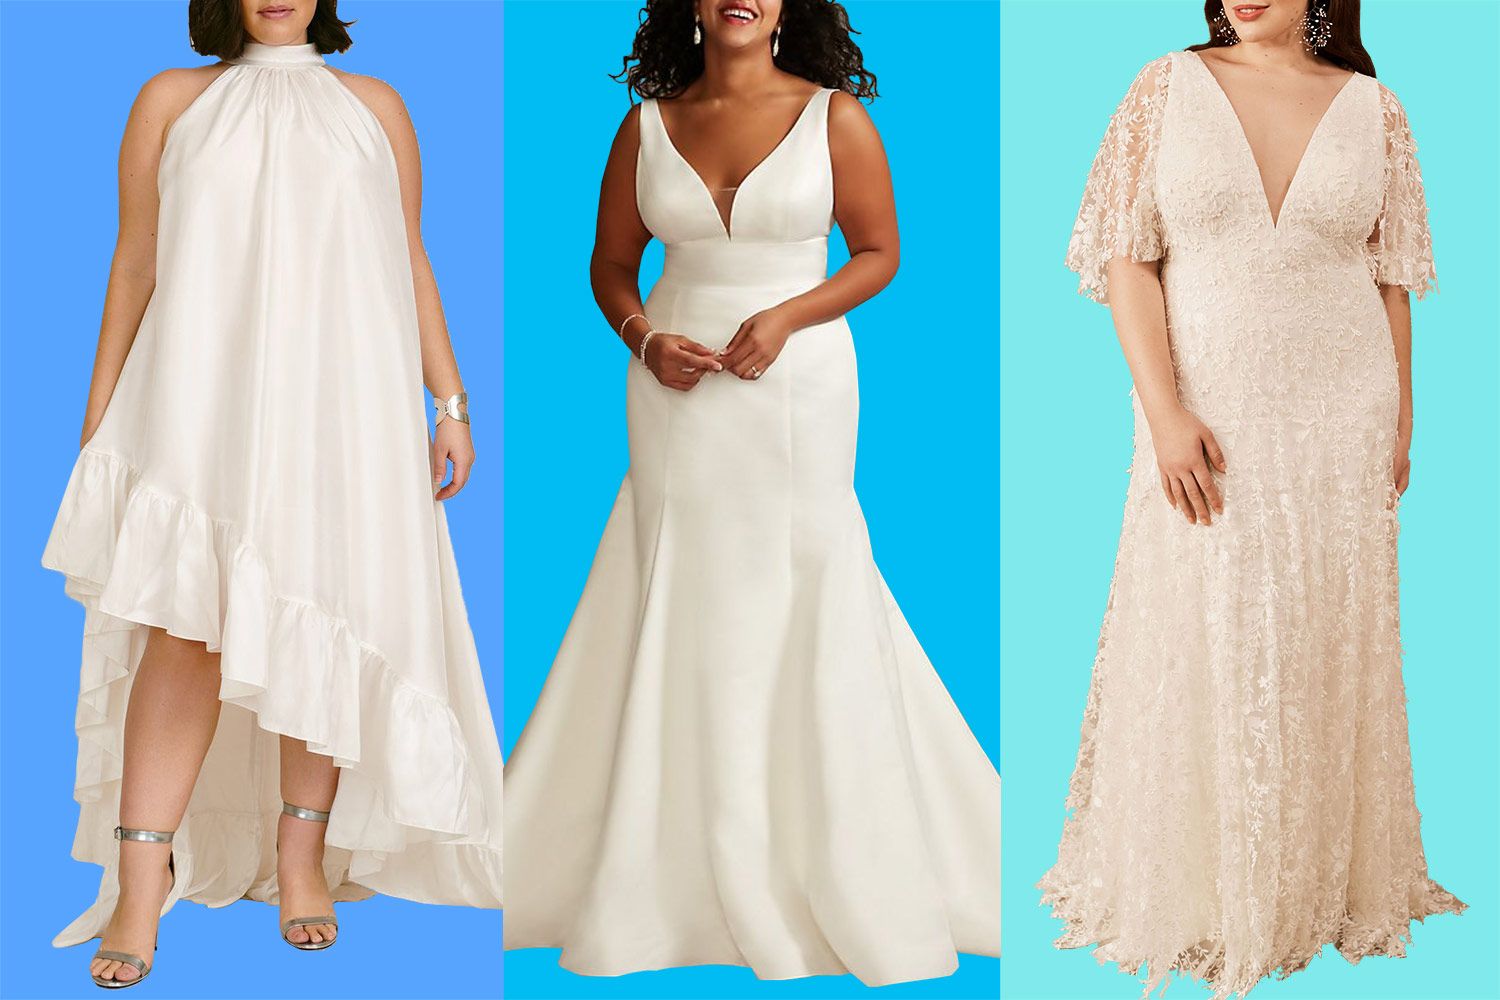 How Shop for Plus-Size Wedding Dress Online | The Strategist